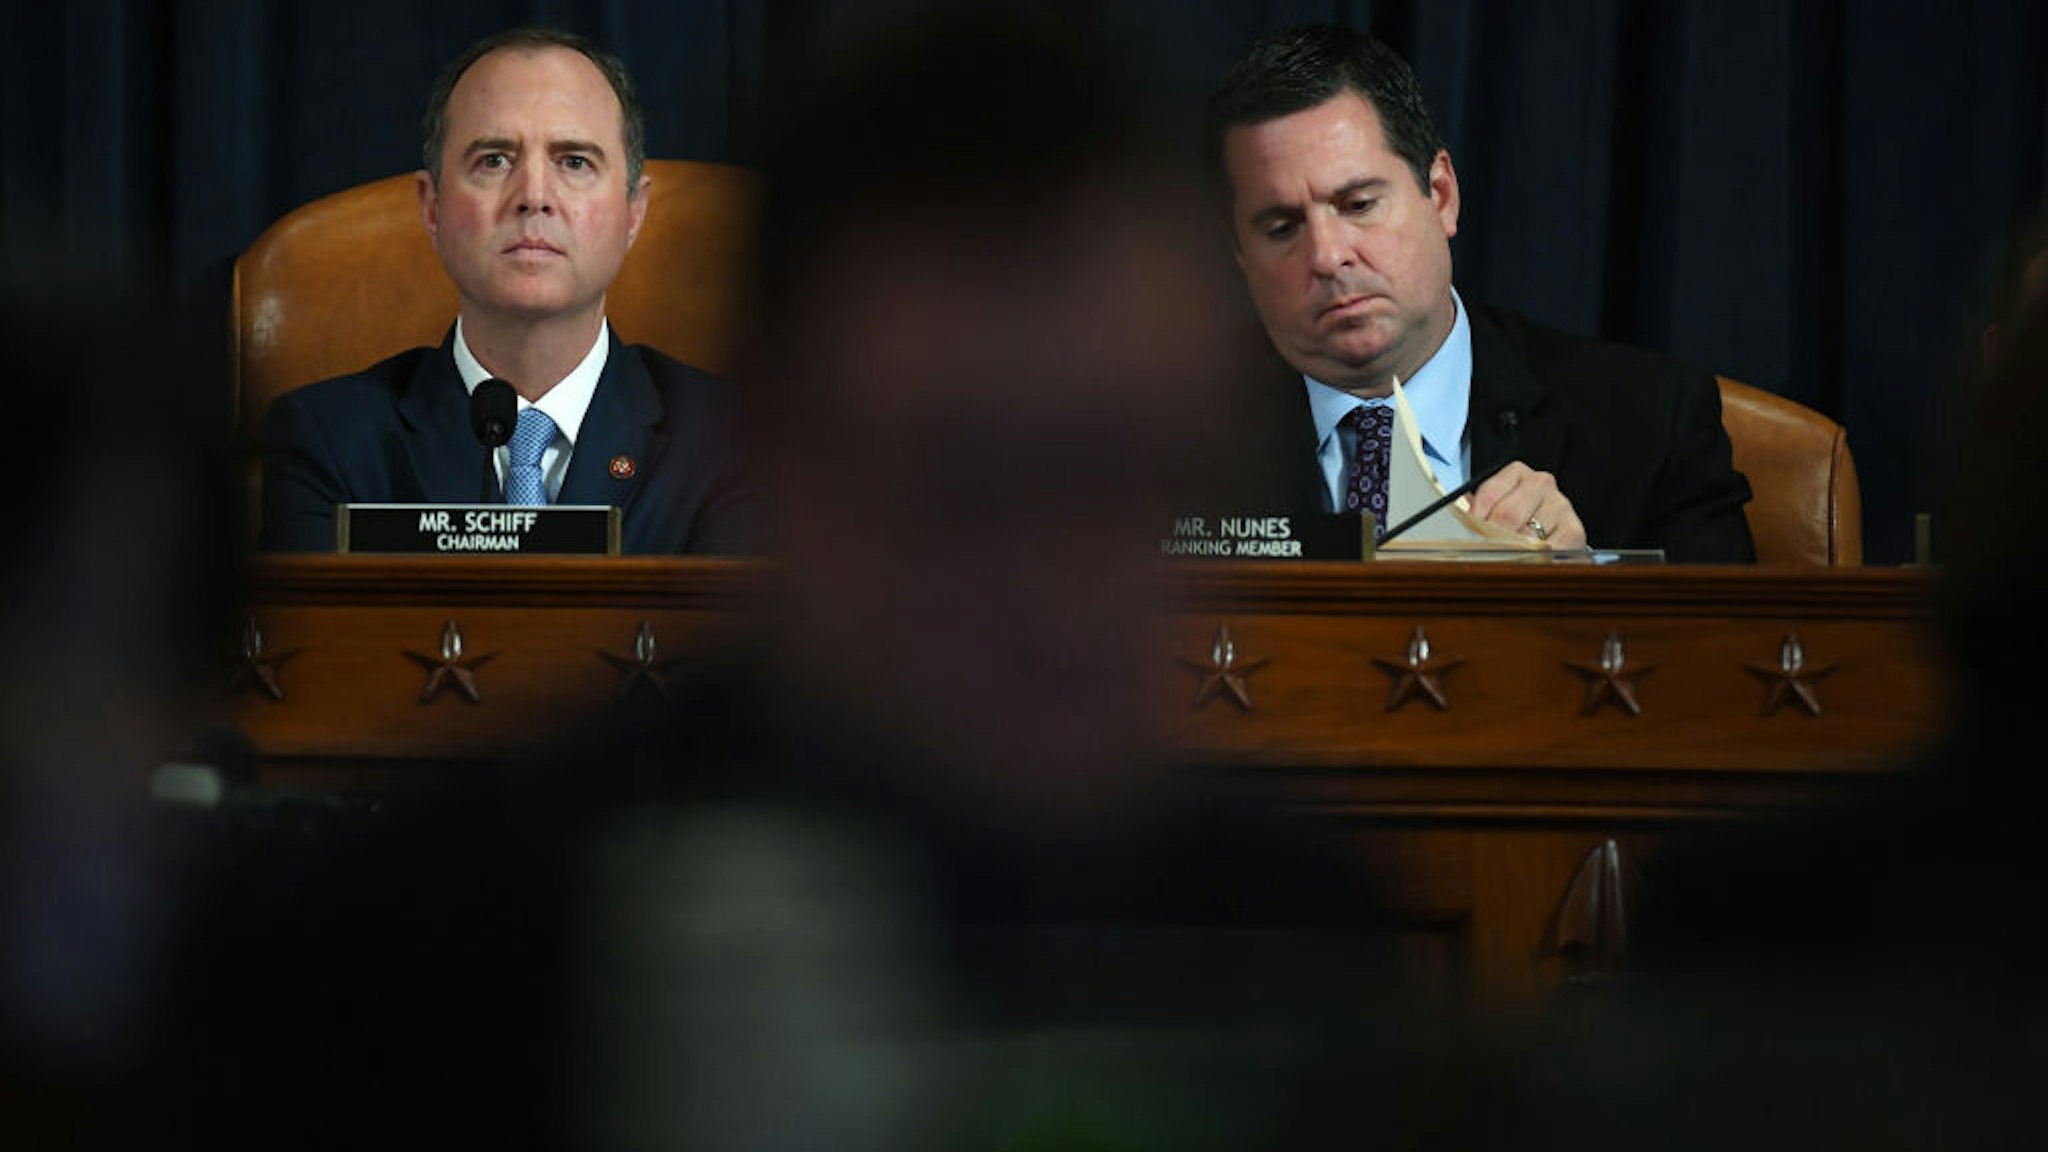 House Intelligence Committee chair, Adam Schiff (D-CA) and U.S. Representative Devin Nunes (R-CA) are seen as David A. Holmes, Department of State political counselor for the United States Embassy in Kyiv, Ukraine and Dr. Fiona Hill, former National Security Council senior director for Europe and Russia appear before the House Intelligence Committee during an impeachment inquiry hearing at the Longworth House Office Building on Thursday November 21, 2019 in Washington, DC.